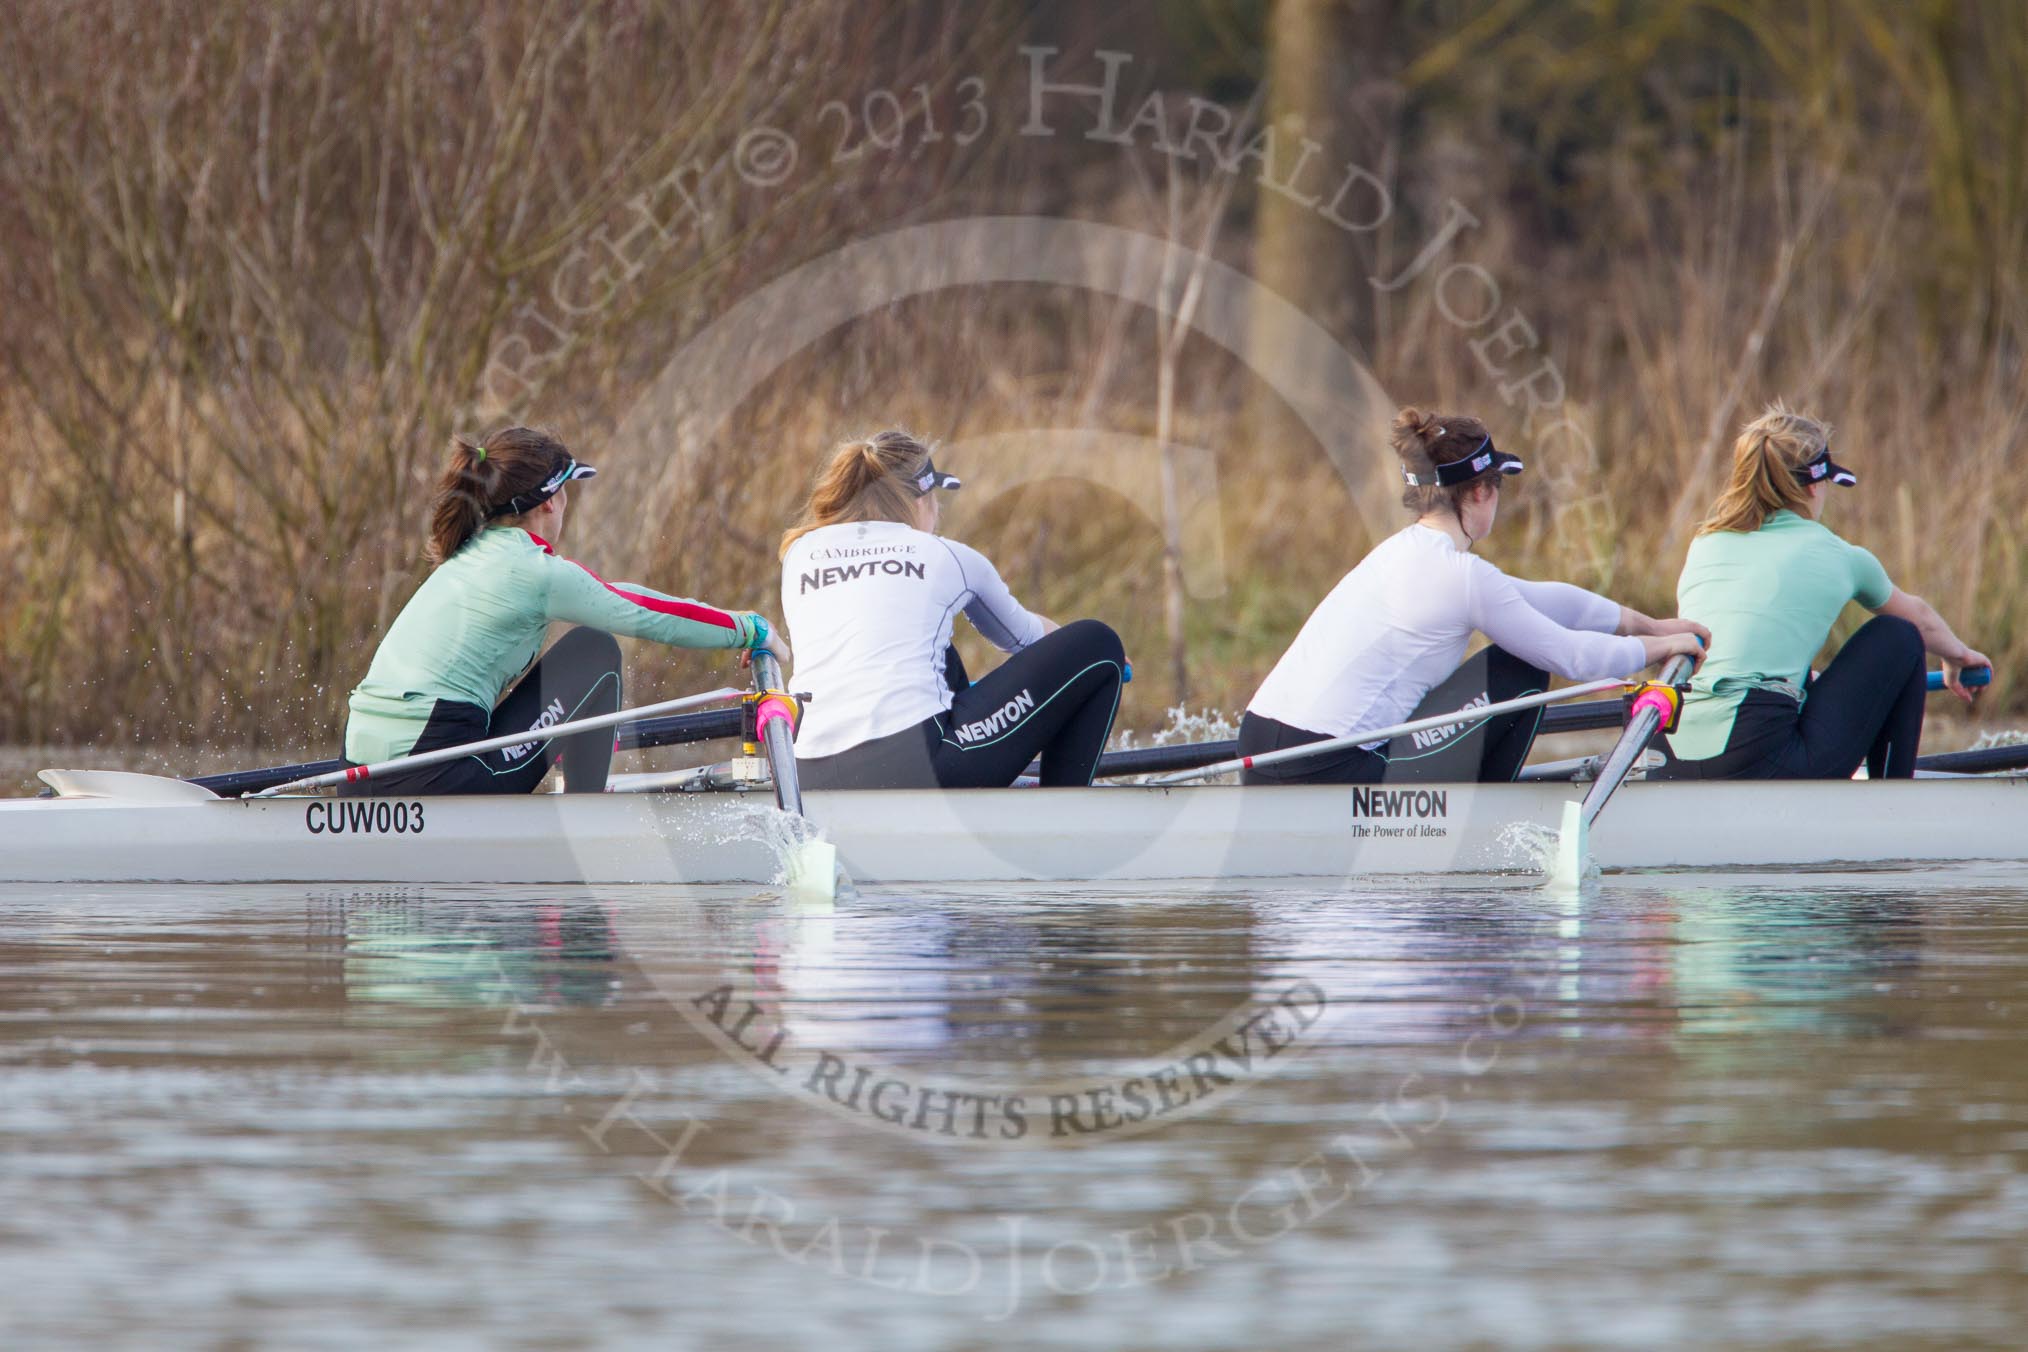 The Boat Race season 2013 - CUWBC training: The CUWBC Blue Boat at race pace - bow Caroline Reid, 2 Fay Sandford, 3 Melissa Wilson and 4 Jessica Denman..
River Thames near Remenham,
Henley-on-Thames,
Oxfordshire,
United Kingdom,
on 19 March 2013 at 16:07, image #121